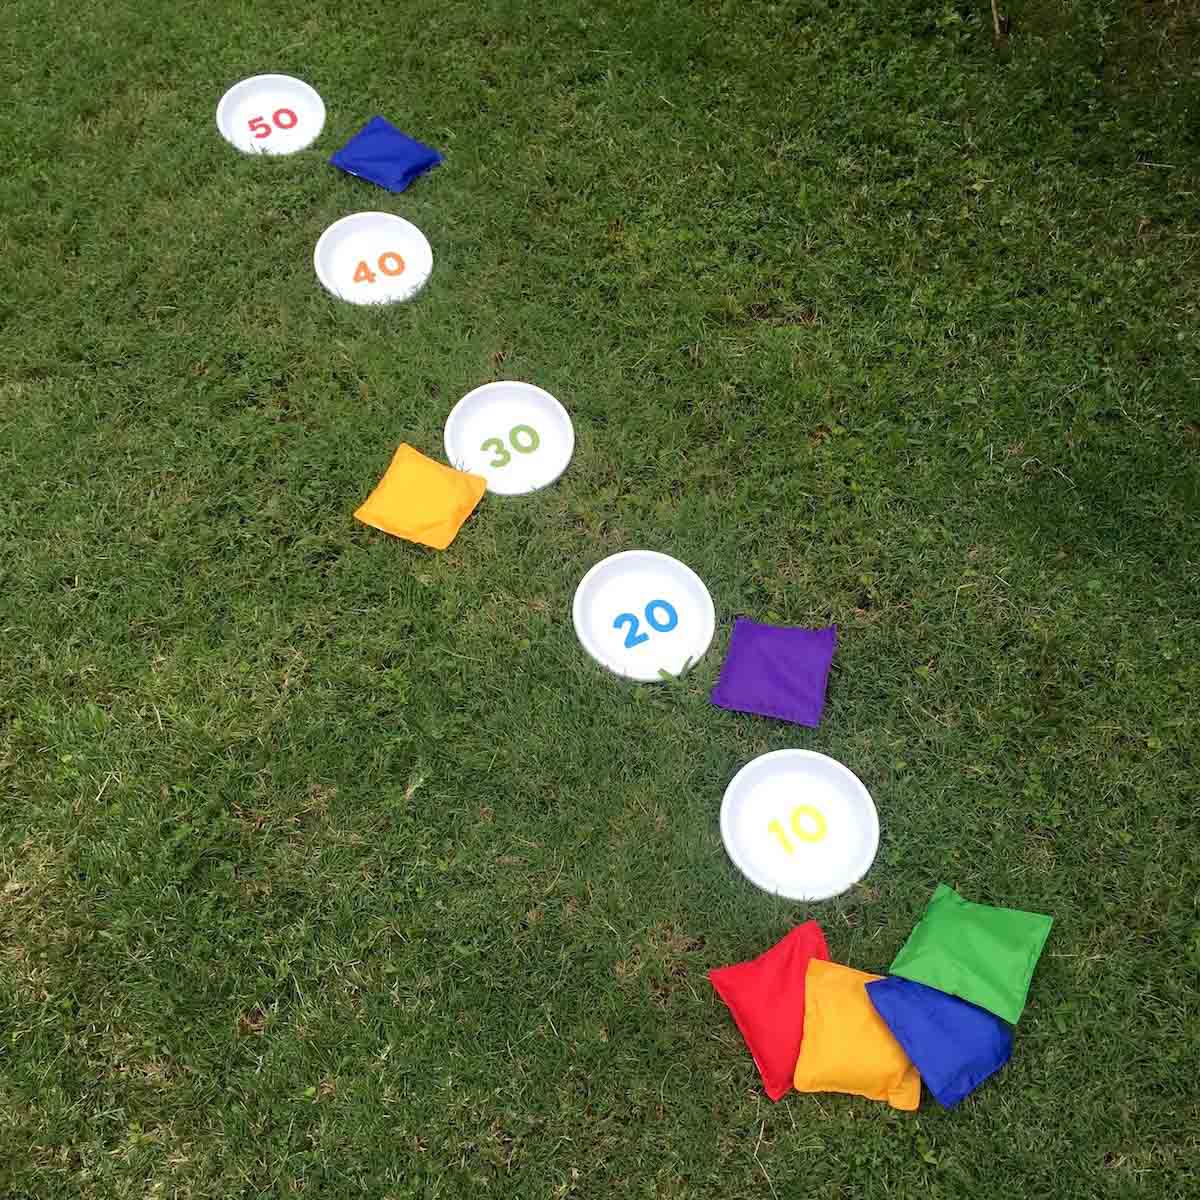 7 Fun Outdoor Games Without Materials